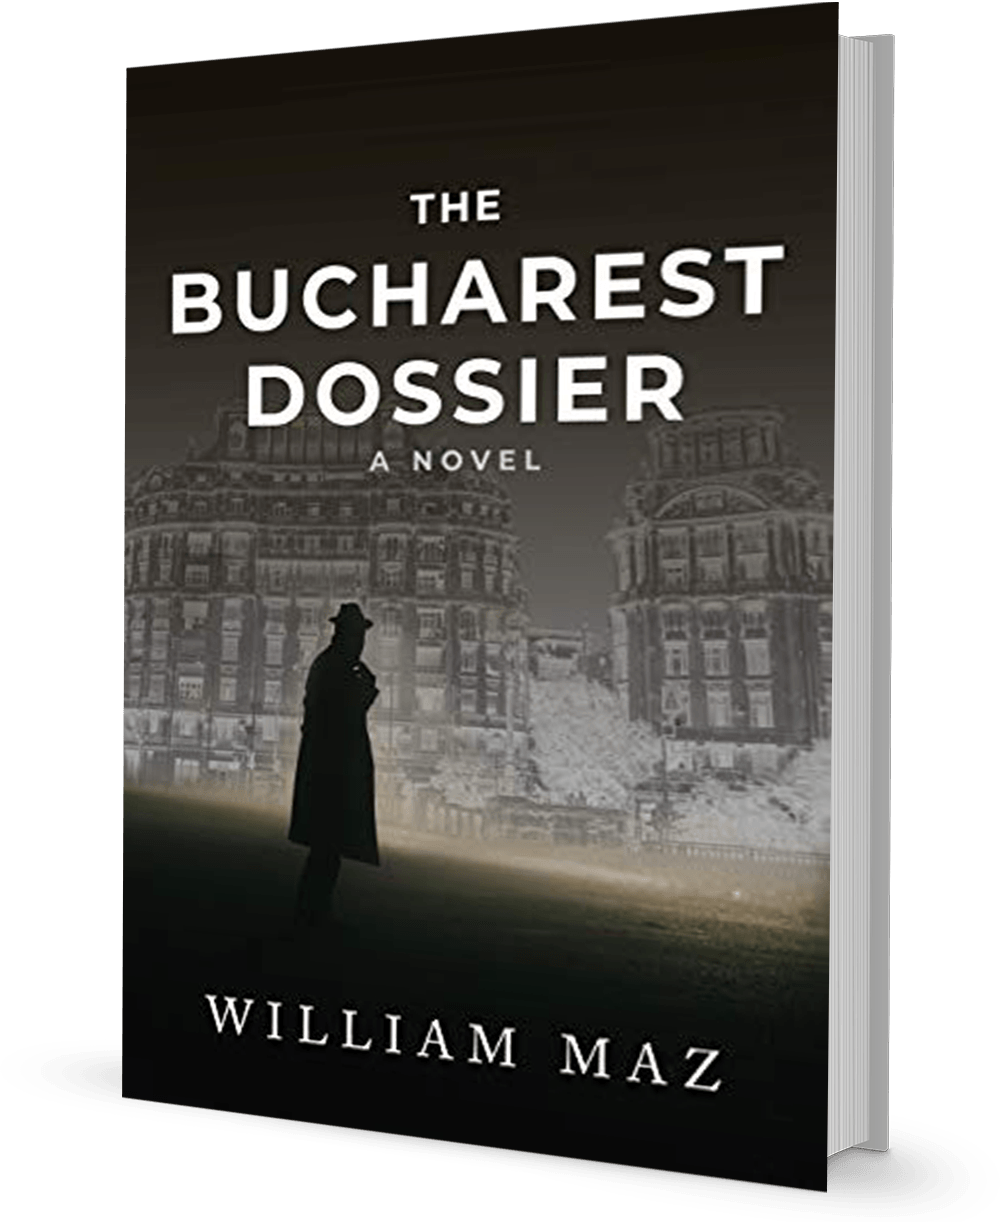 Cover of "The Bucharest Dossier" by William Maz. (Oceanview Publishing)